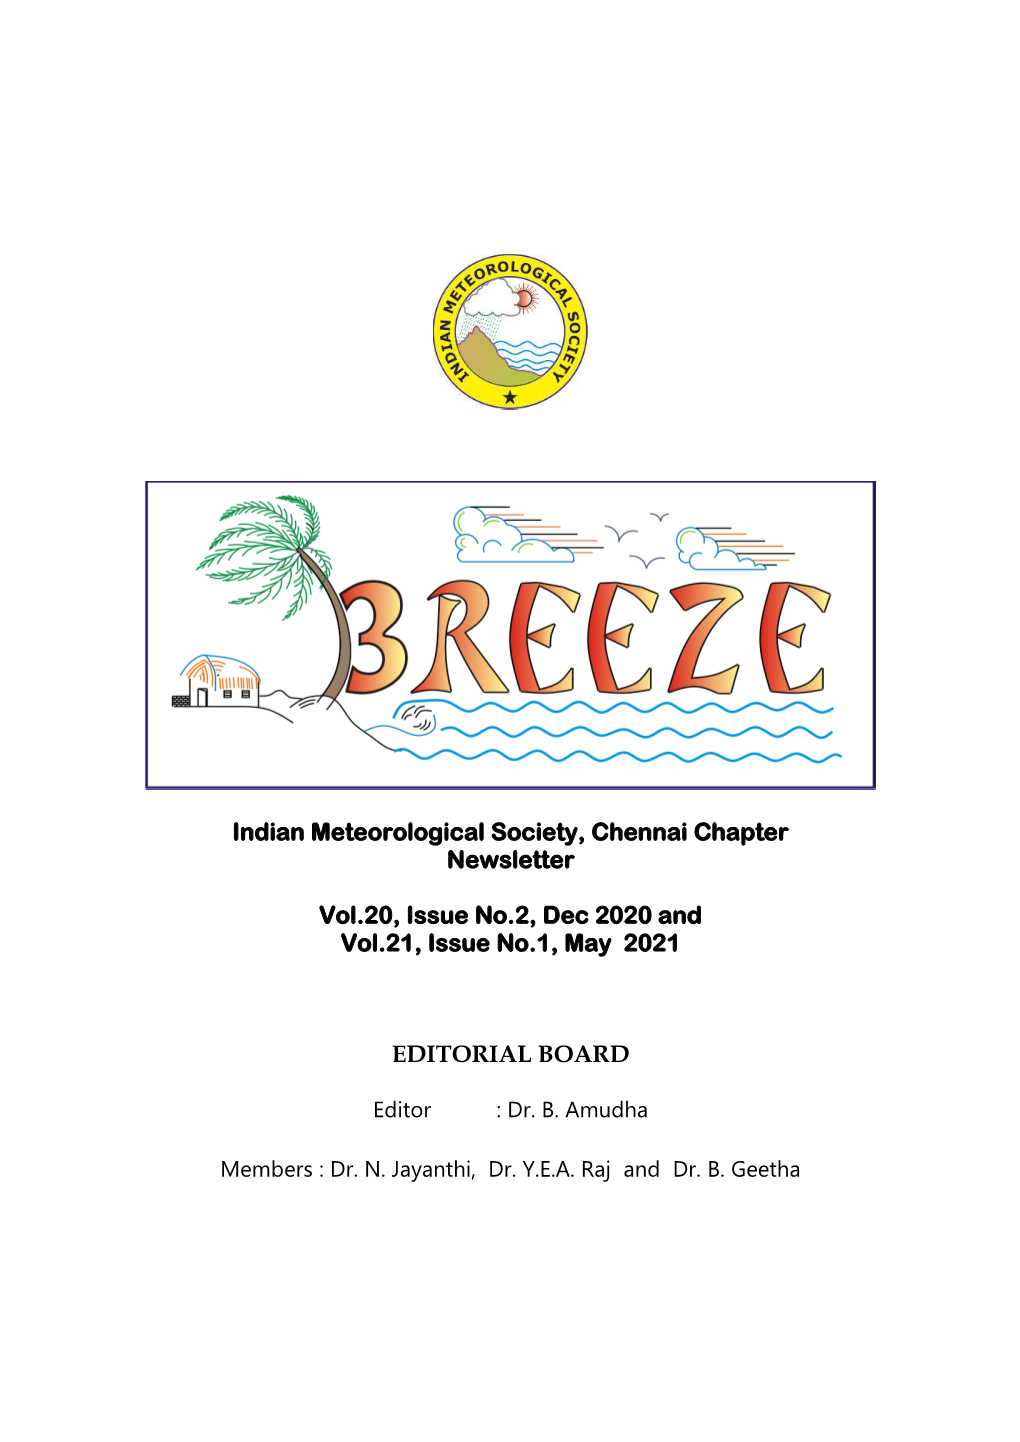 Indian Meteorological Society, Chennai Chapter Newsletter Vol.20